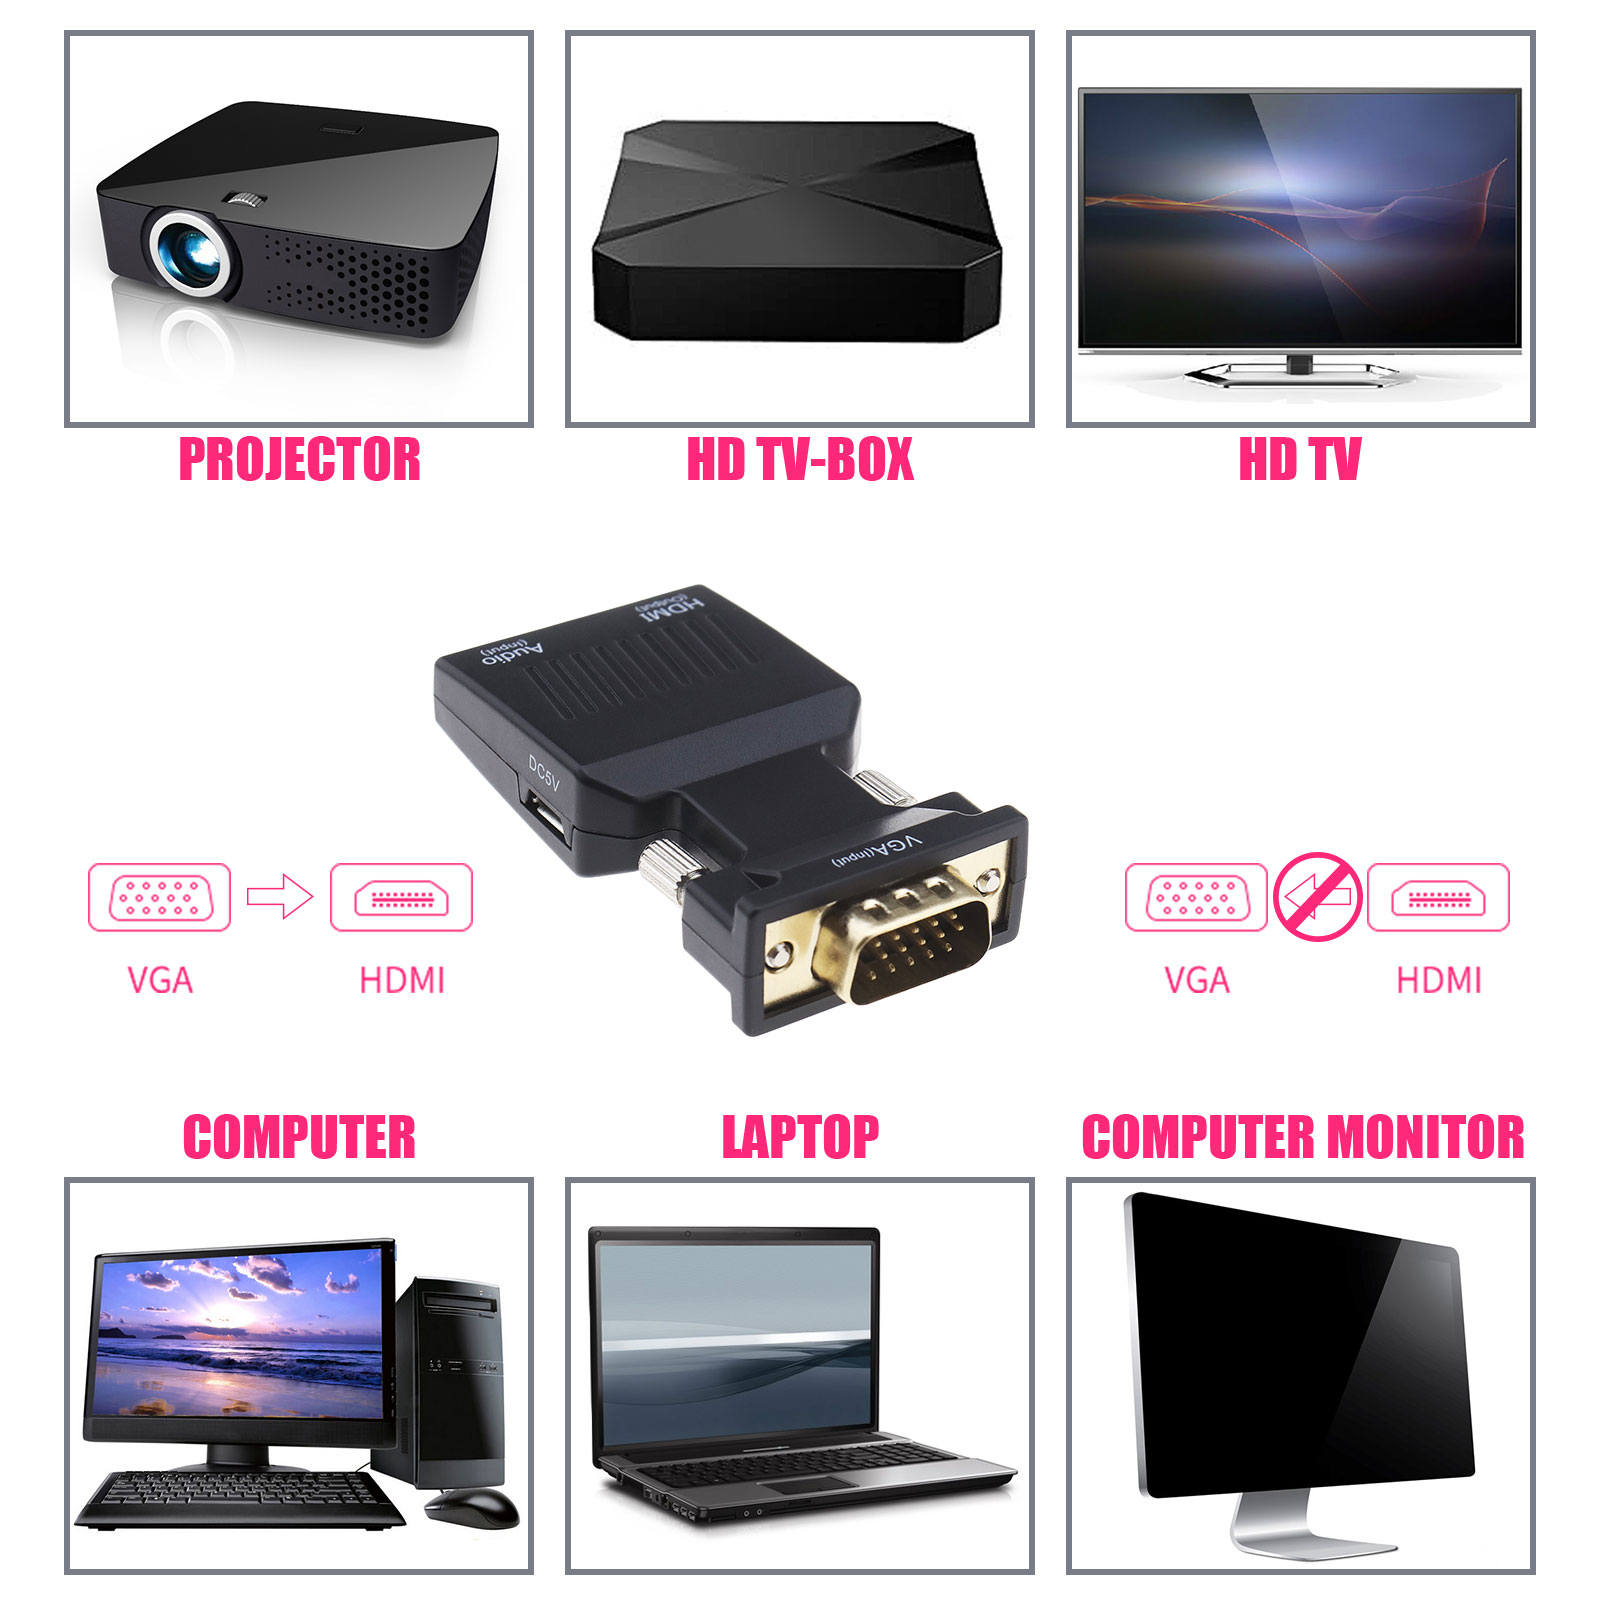 connect laptop with hdmi port to a projector with vga